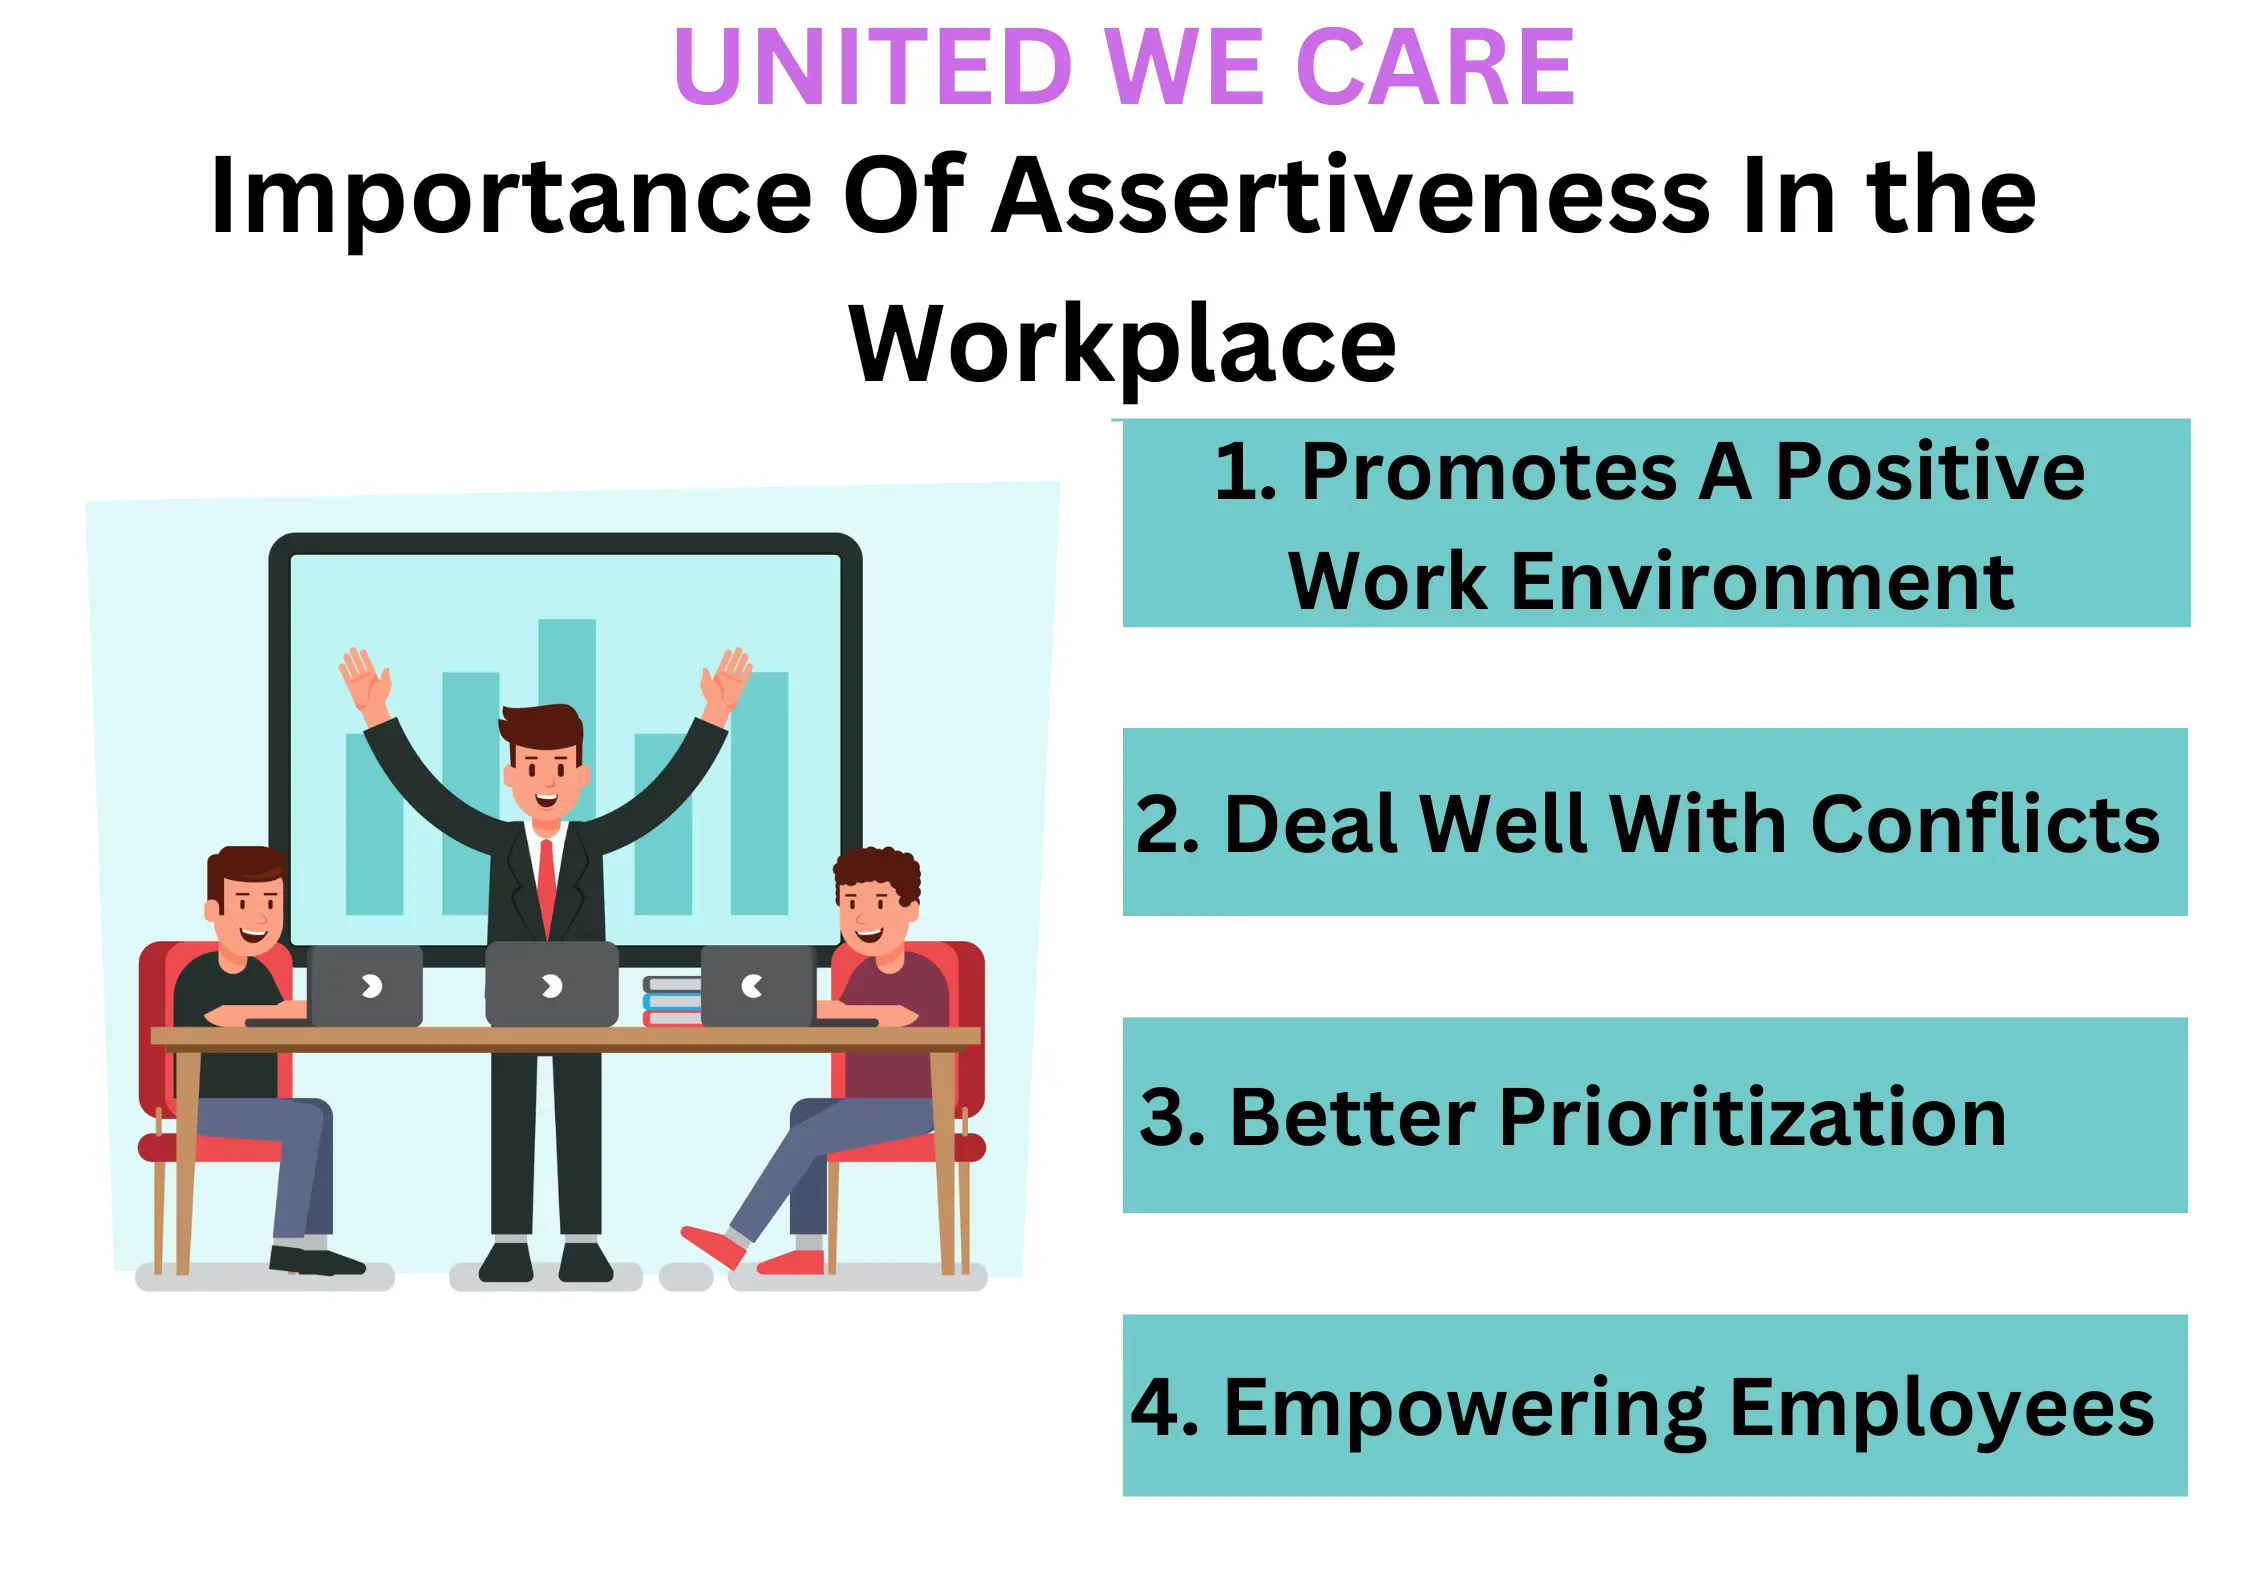  Assertive in the workplace: 5 Best Ways to be Assertive in the Workplace
